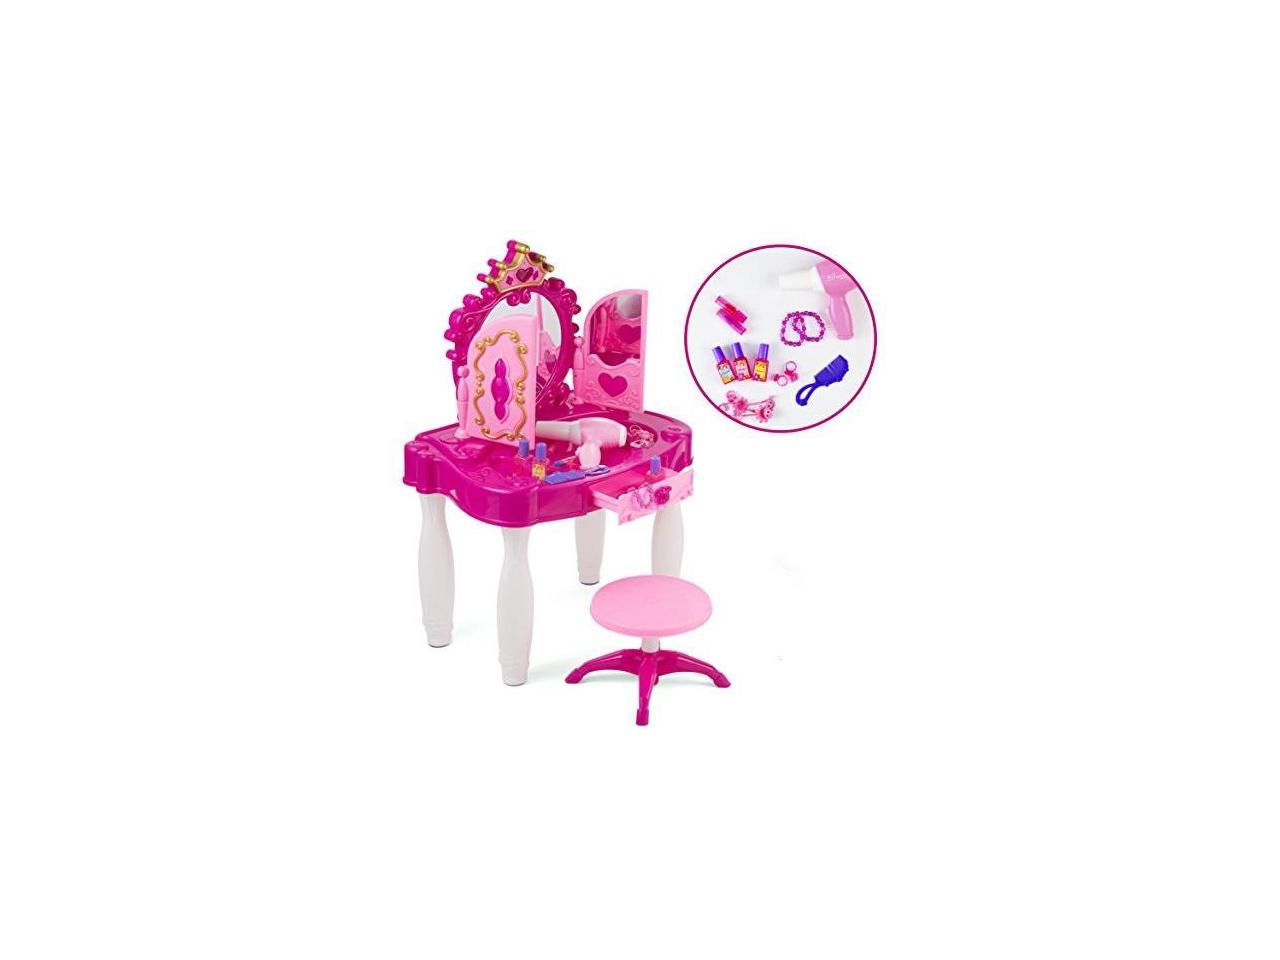 Pretend Play Kids Vanity Table and Chair Beauty Mirror and Accesories Play Set with Fashion & Makeup Accessories for Girls 